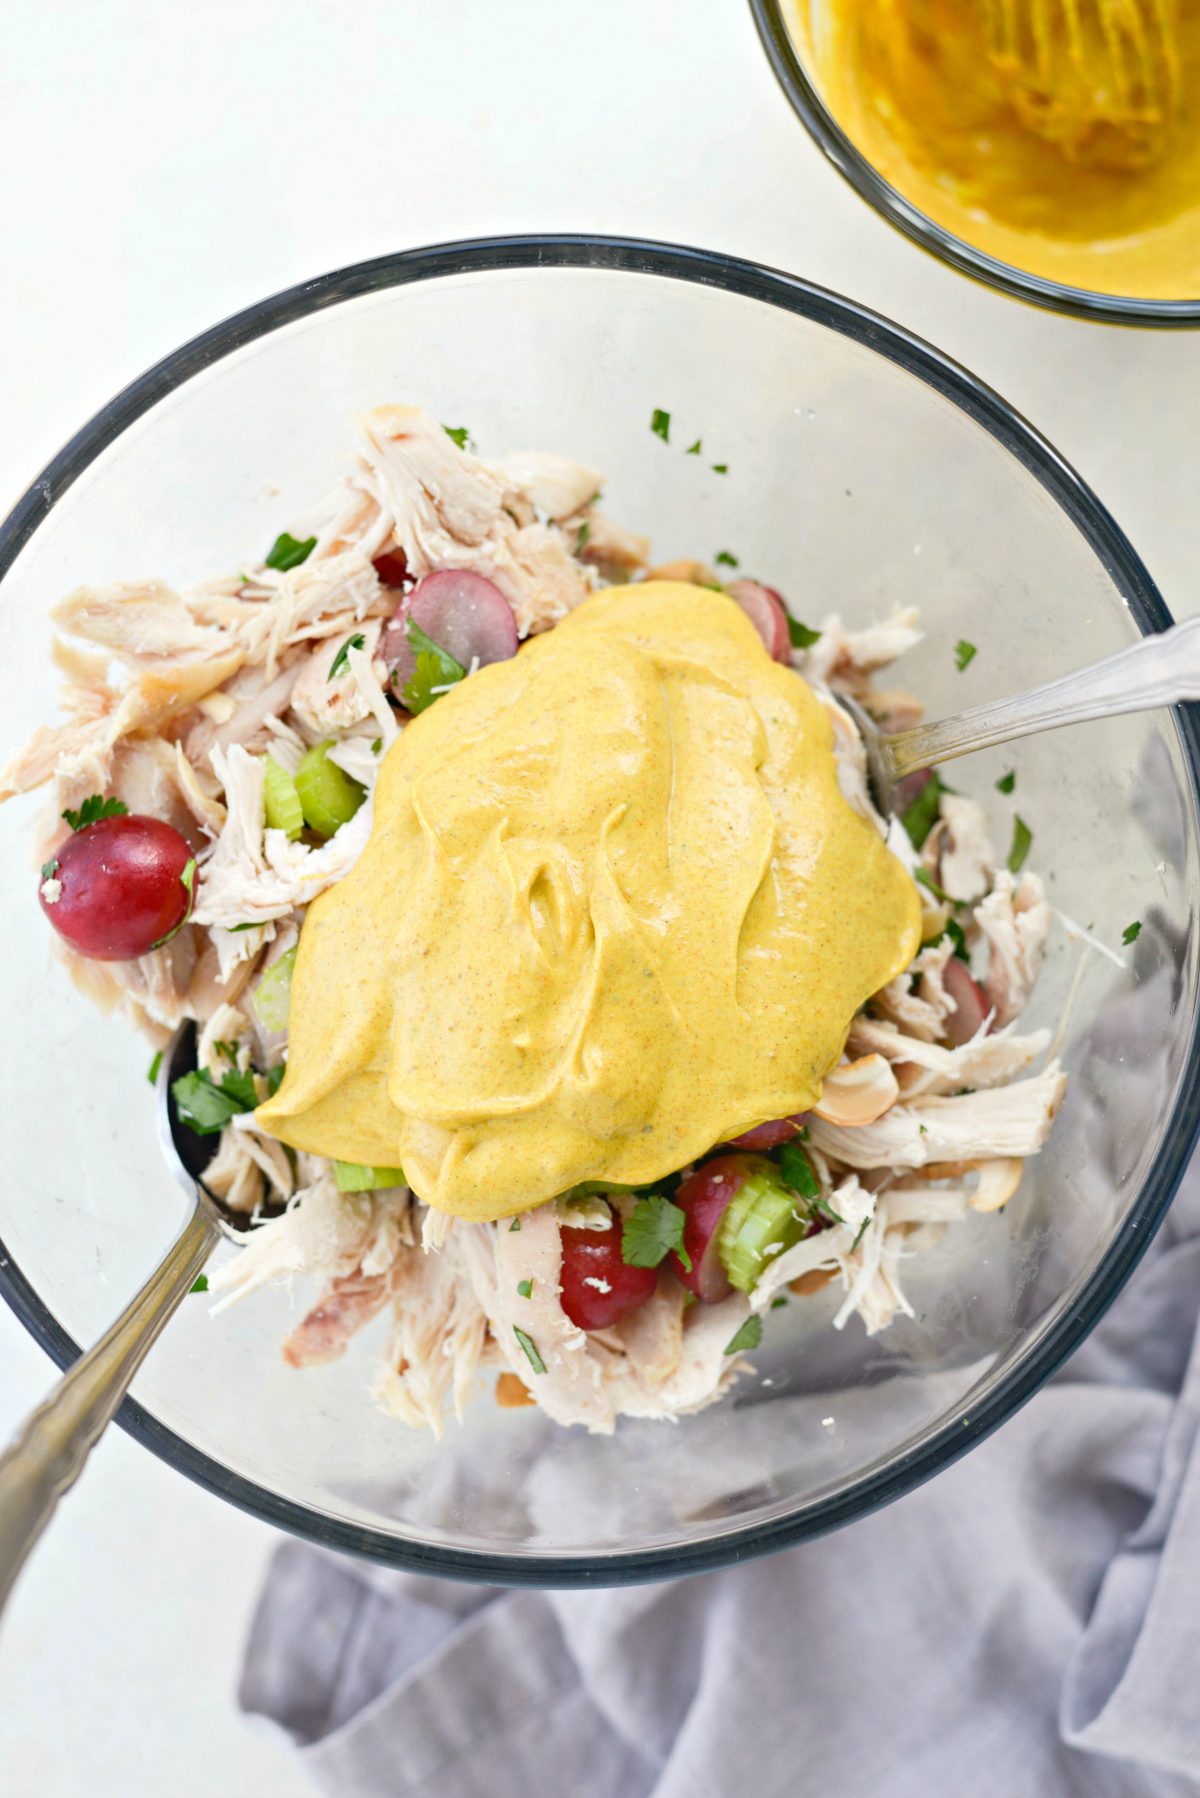 Curried Chicken Salad with Grapes and Cashews l SimplyScratch.com #curry #turmeric #chicken #salad #healthy #grapes #cashews #lunch #easy #recipe